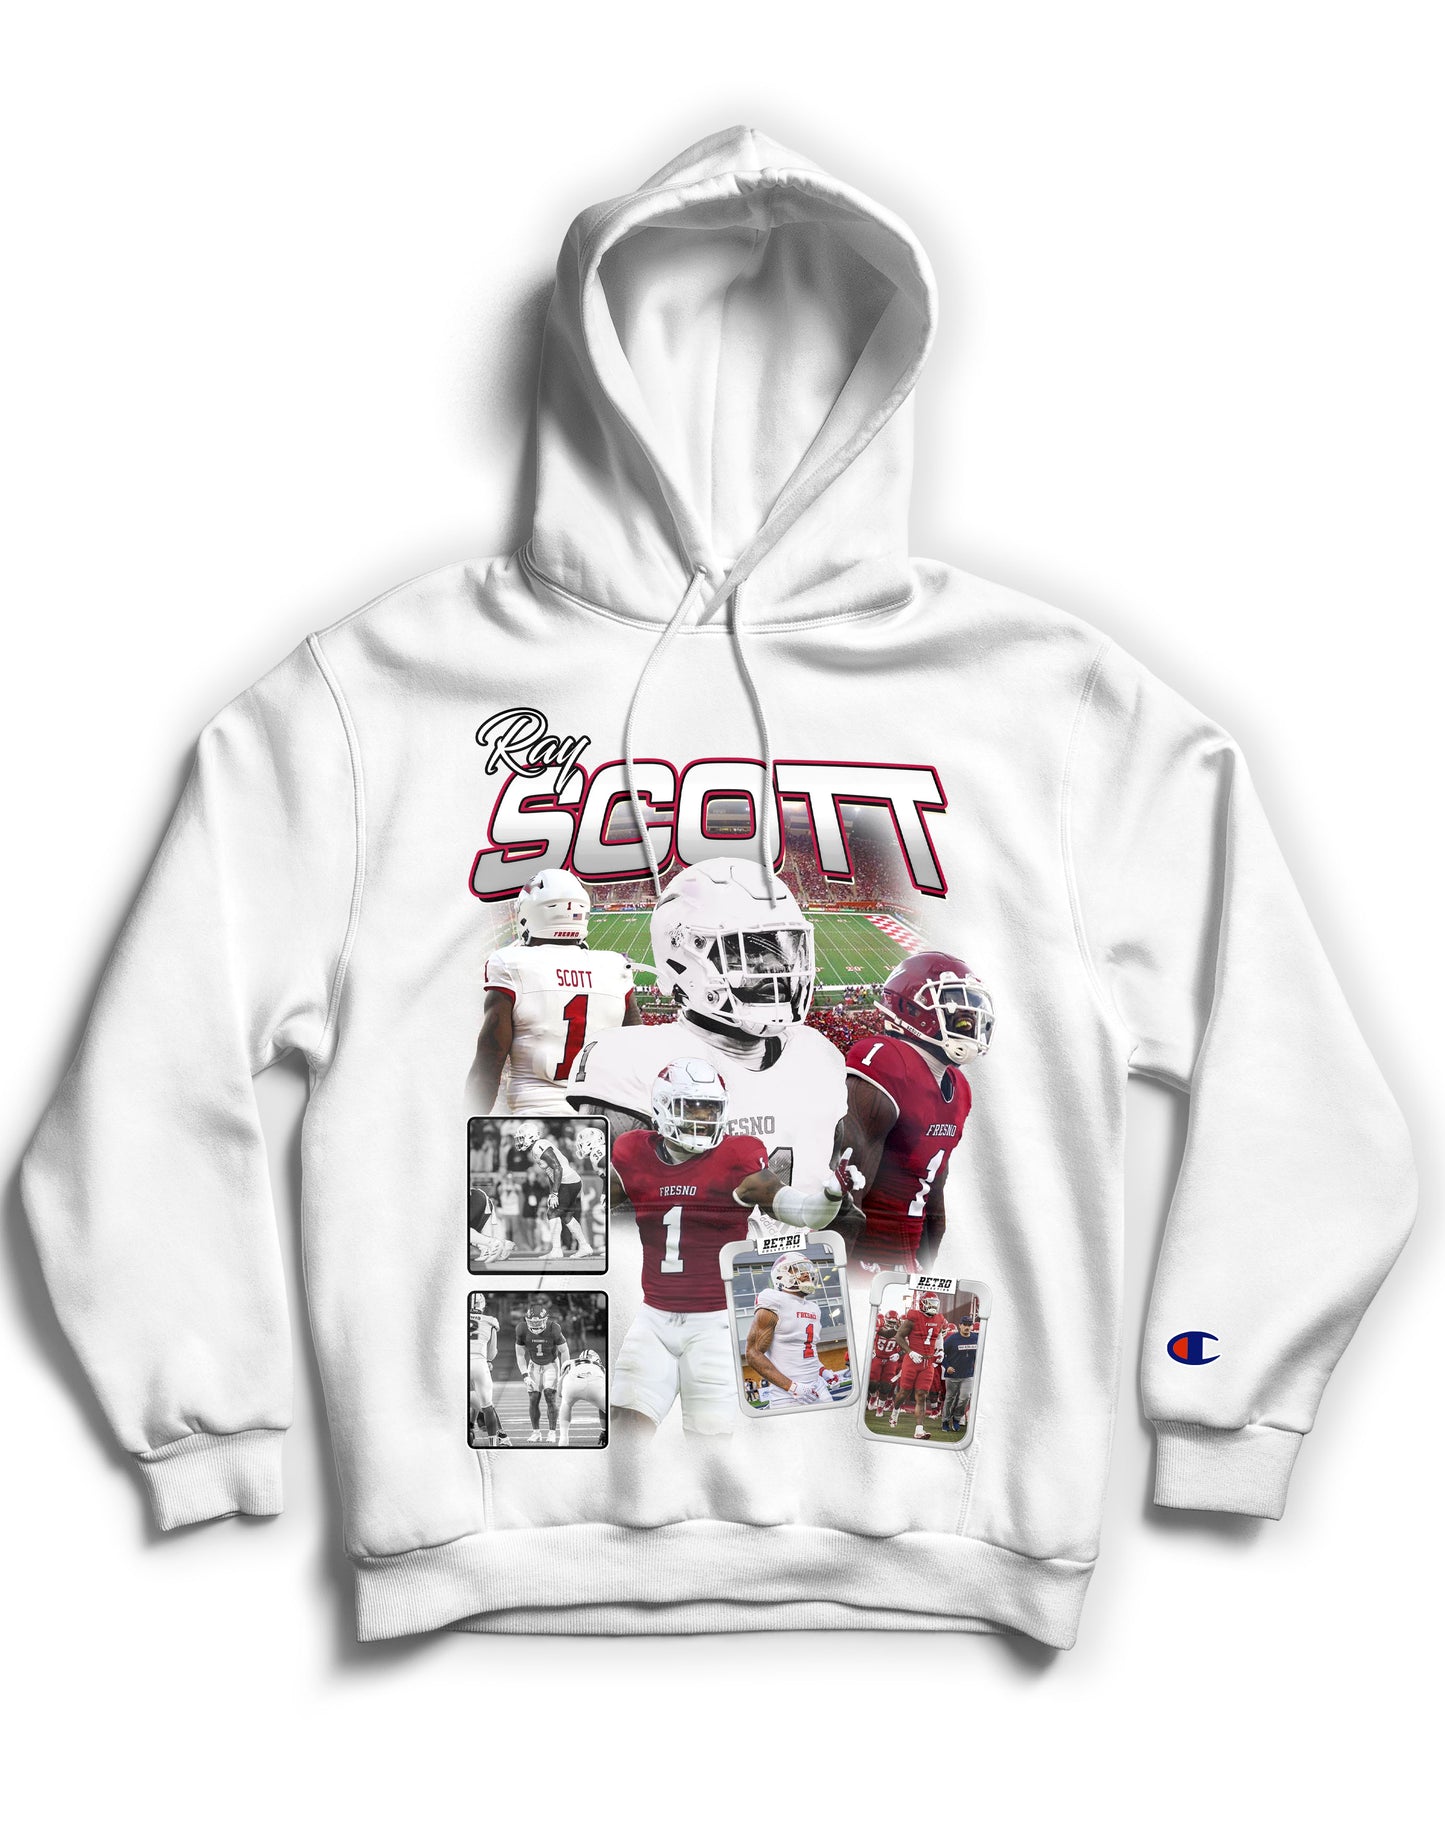 Ray "1" Scott Tribute Hoodie *LIMITED EDITION* (Black & White)